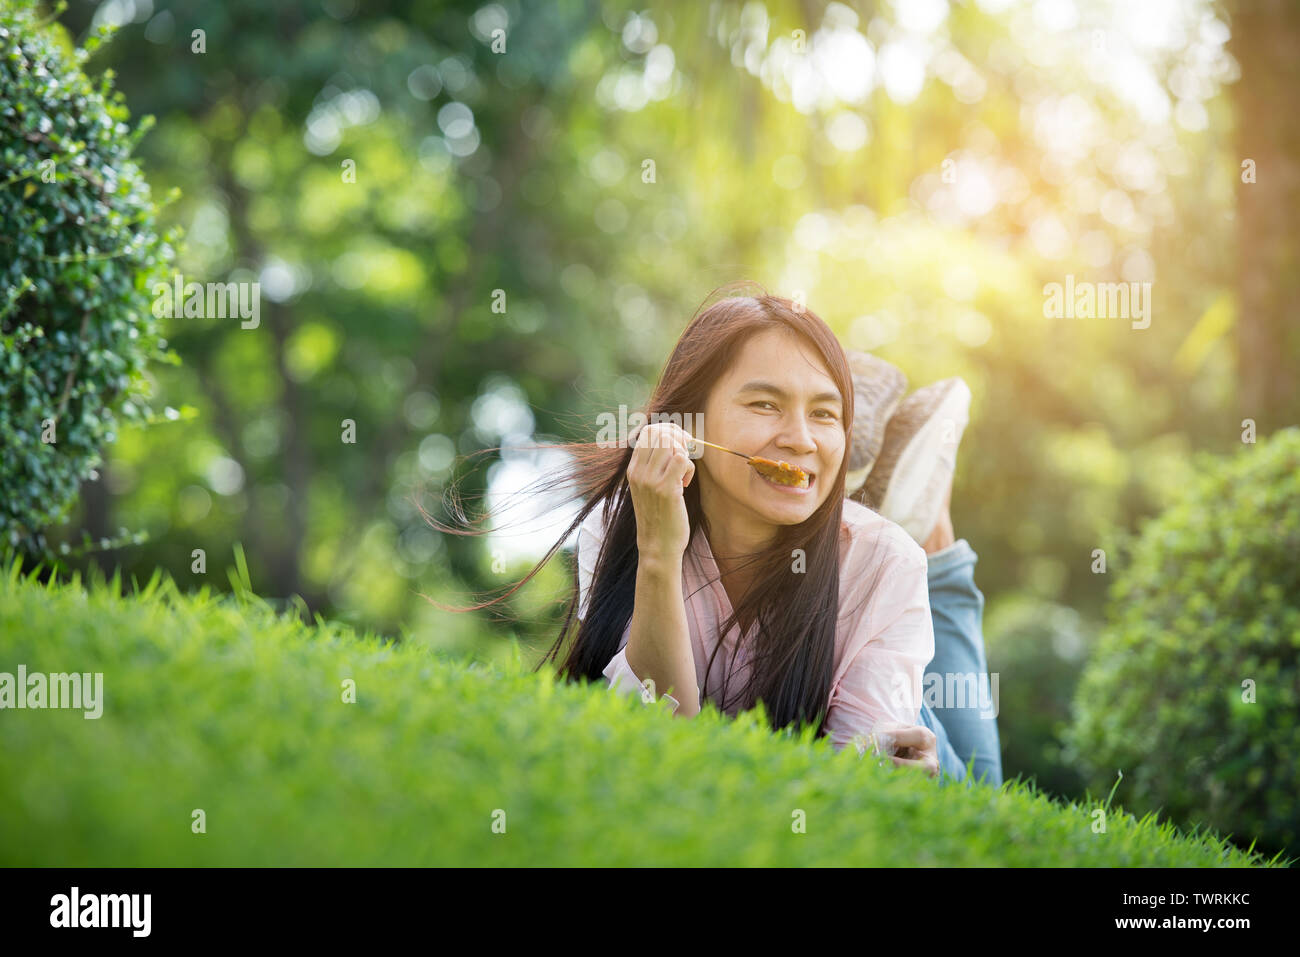 Relaxed Young Beautiful Woman With Smiling Face At The Park. Time To Relax After Work. Horizontal.Blurred Background.Film effect. Stock Photo